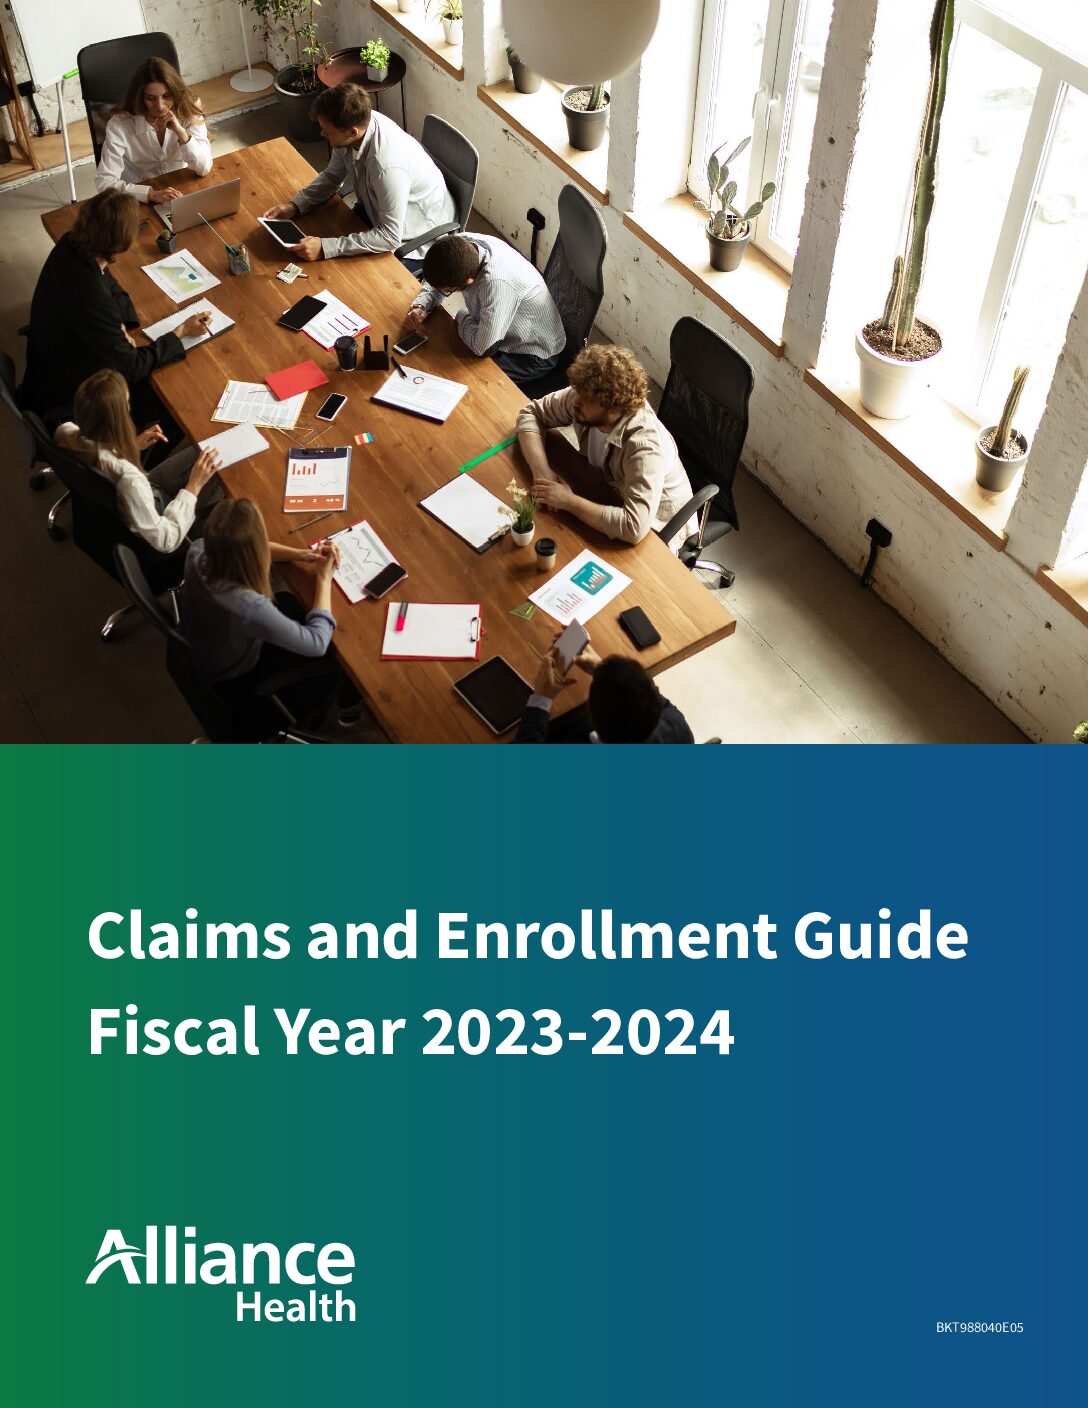 Claims and Enrollment Guide Fiscal Year 2023 - 2024